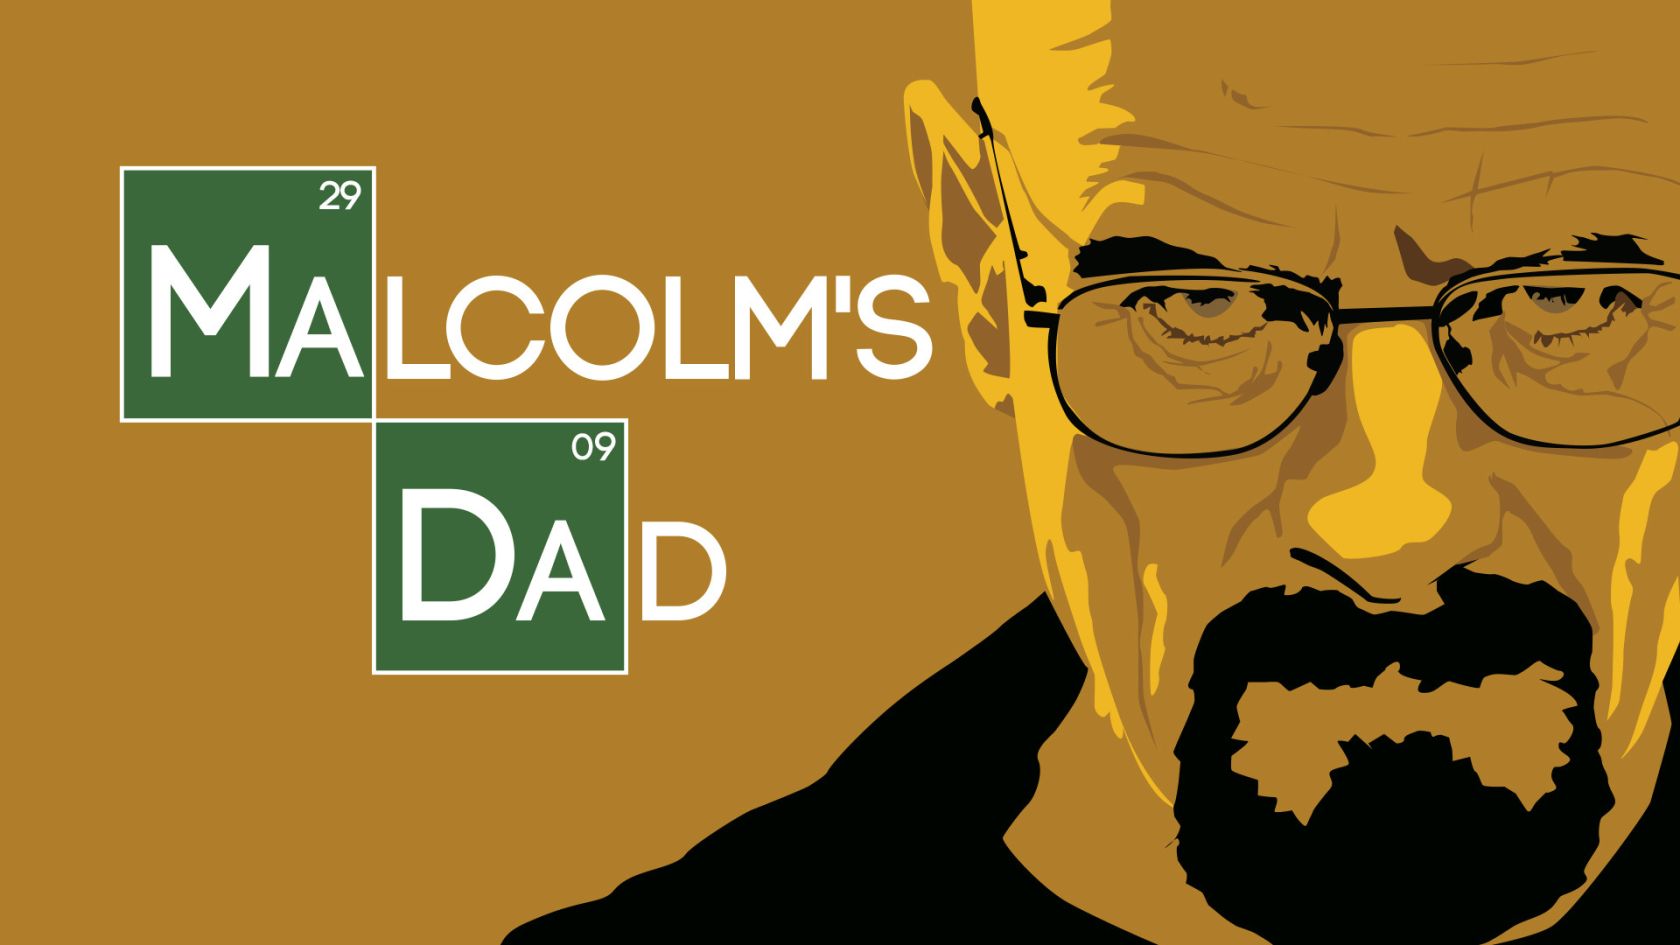 Breaking Bad Parody Wallpaper I Made For An Animation Project M